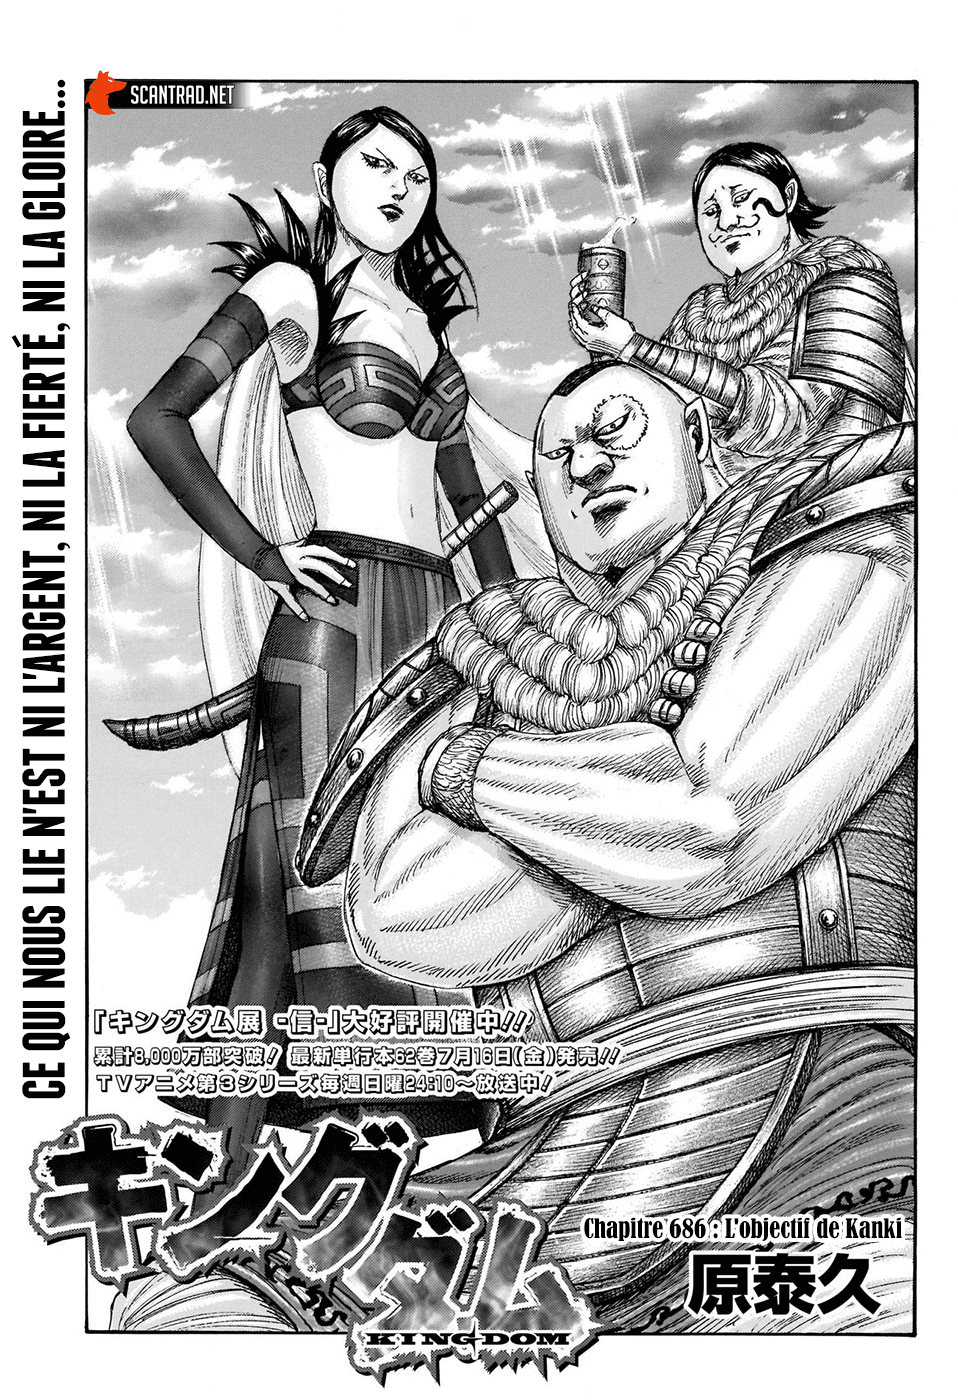 Kingdom: Chapter 686 - Page 1